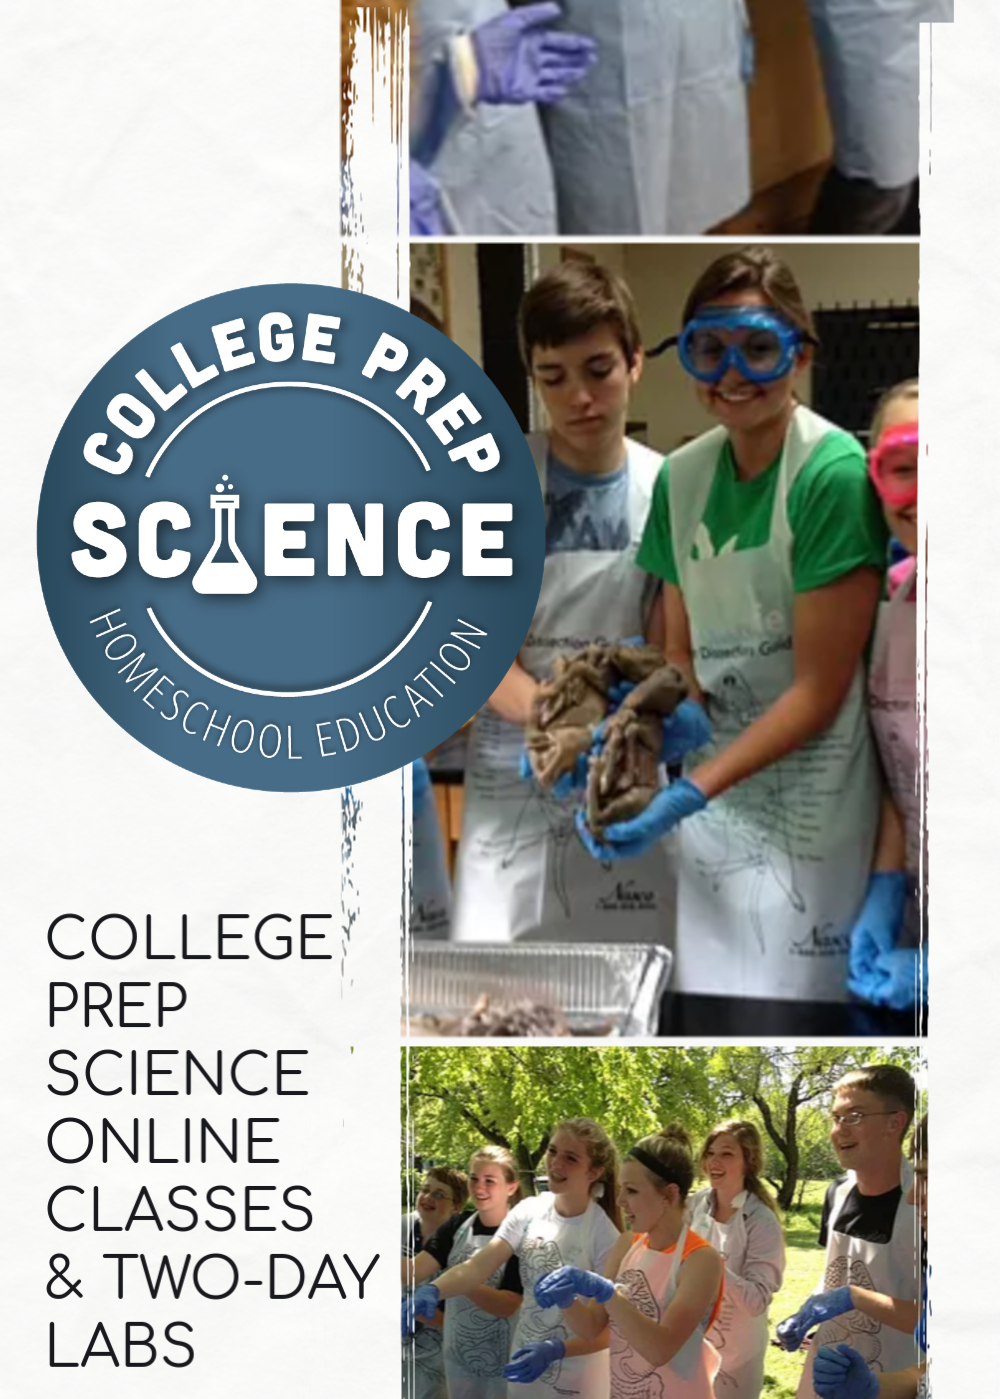 College Prep Science Online Classes for Homeschool Students and 2-Day Lab Intensives in 15 Cities Across the Country 2019-2020 School year